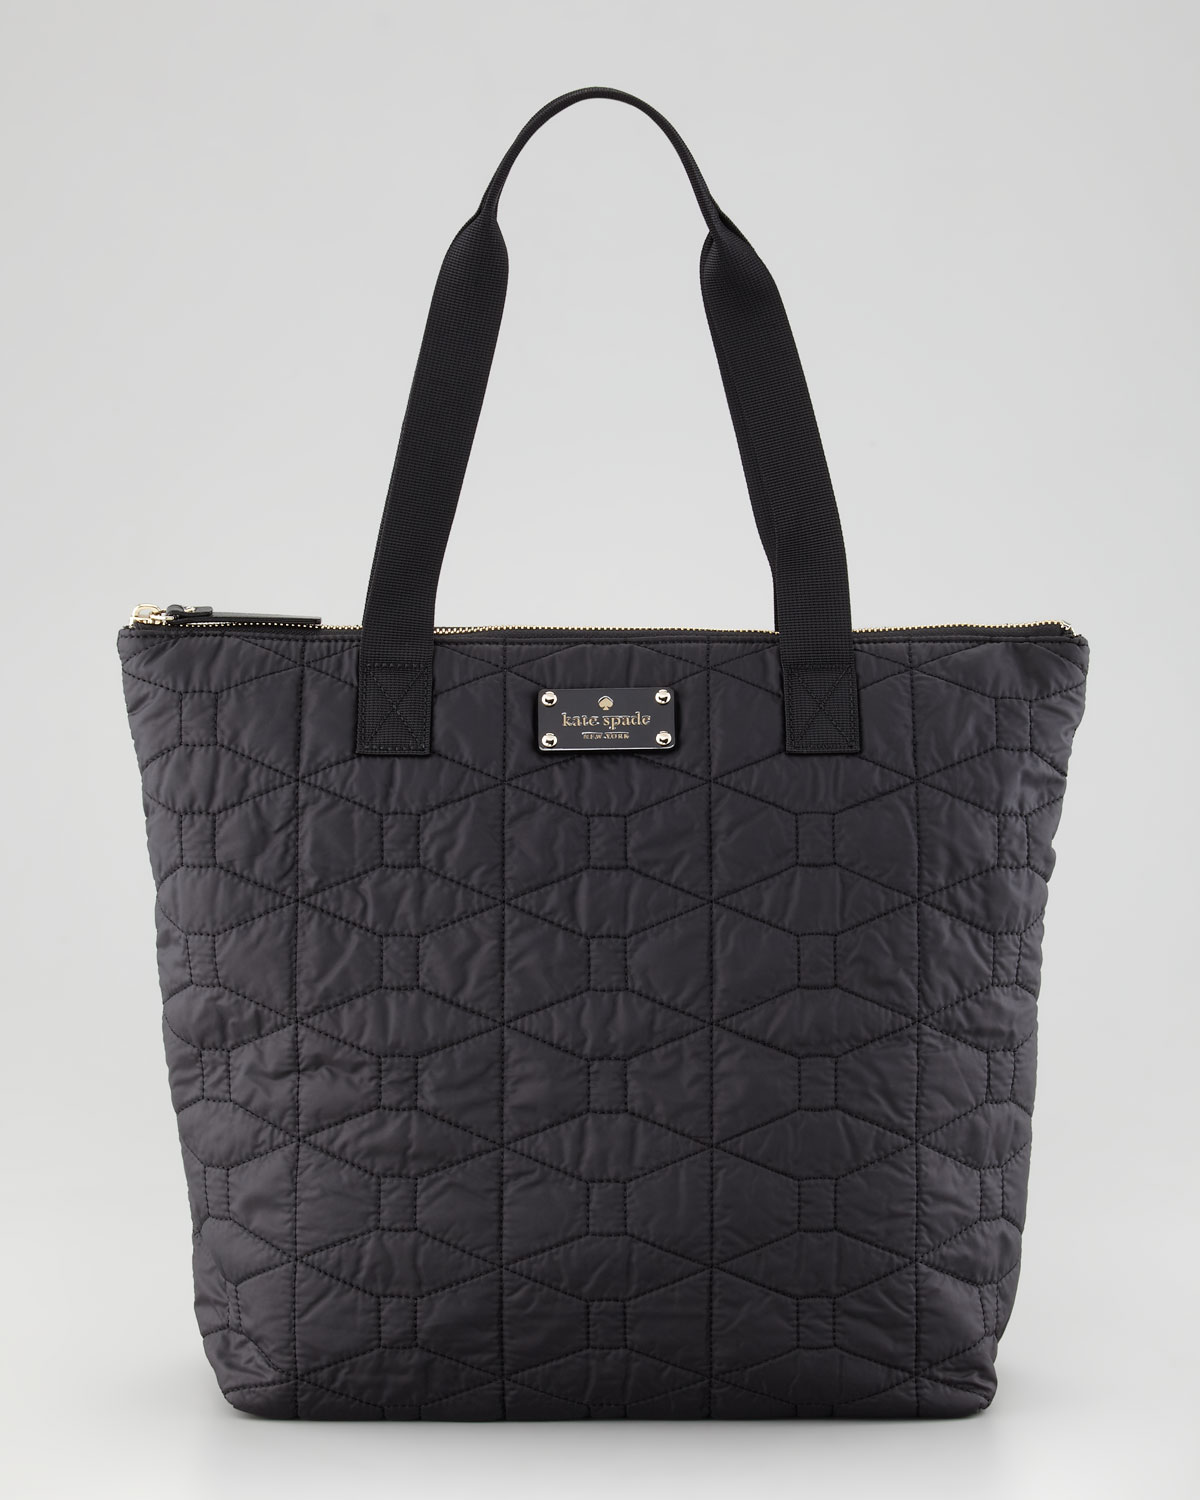 Kate Spade Bon Quilted Nylon Shopper Tote Bag in Black | Lyst